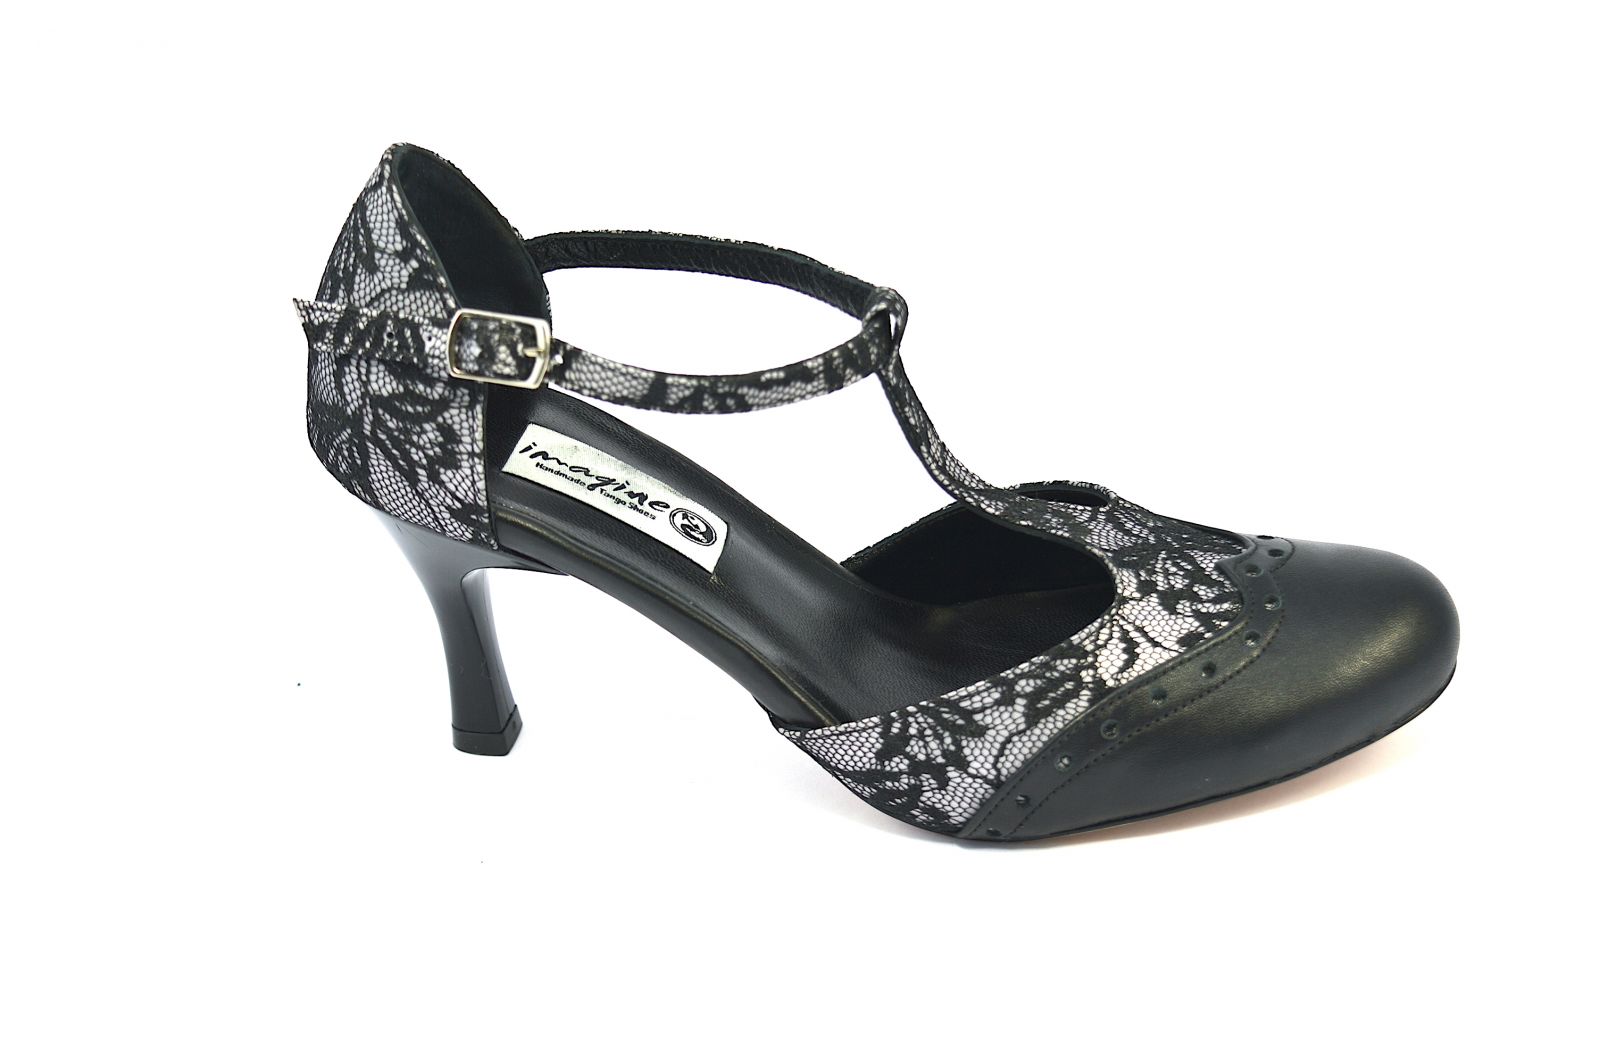 Women's Tango Shoe, closed toe style, with black lace and black soft leather